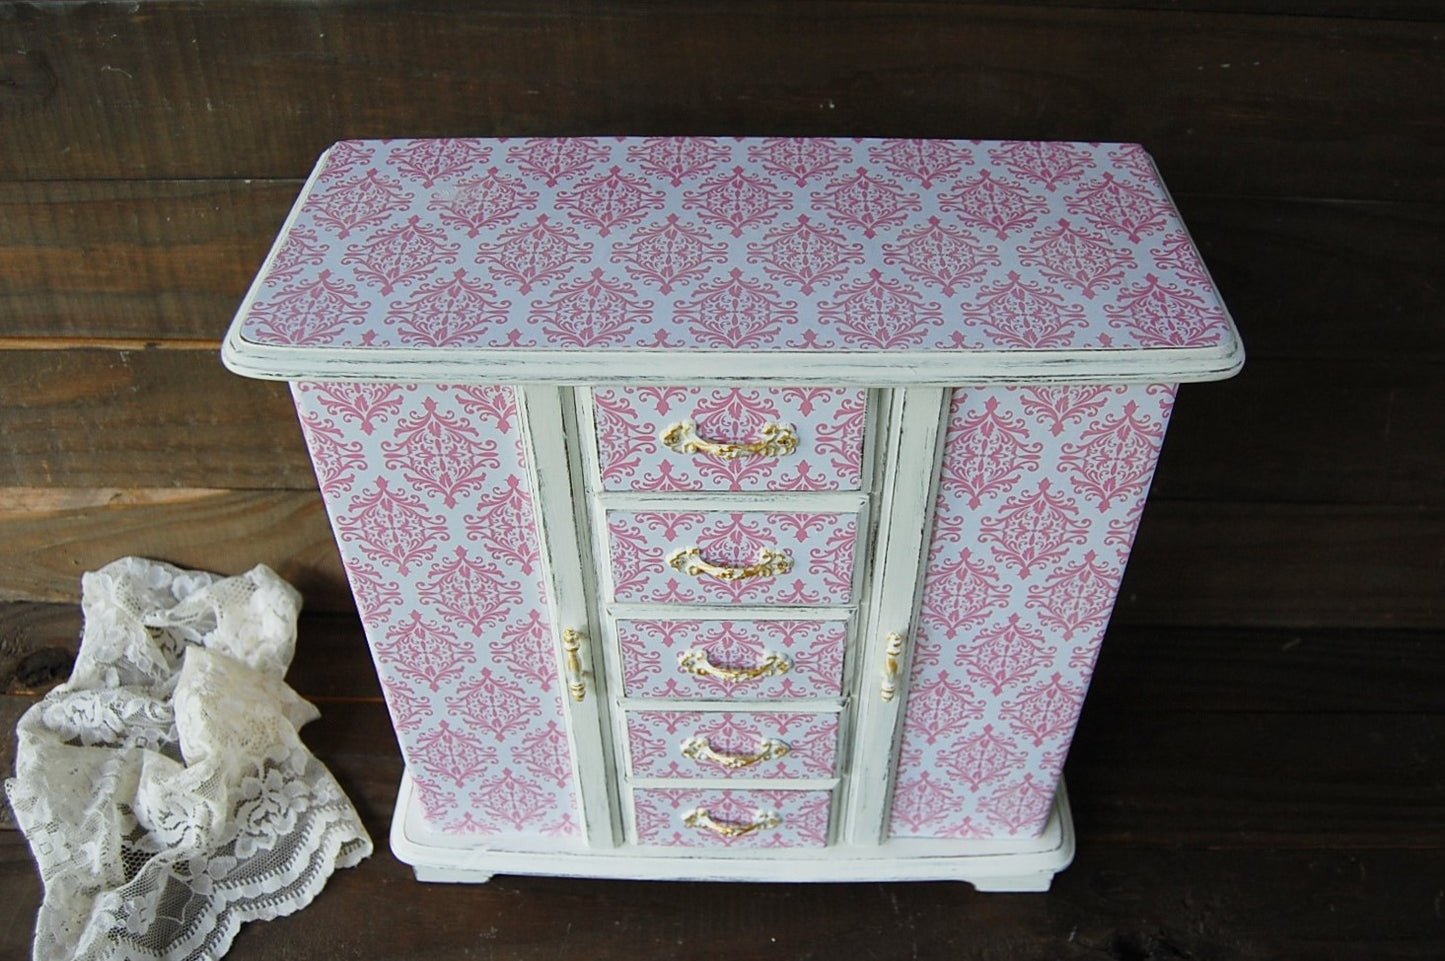 Cottage damask armoire - The Vintage Artistry